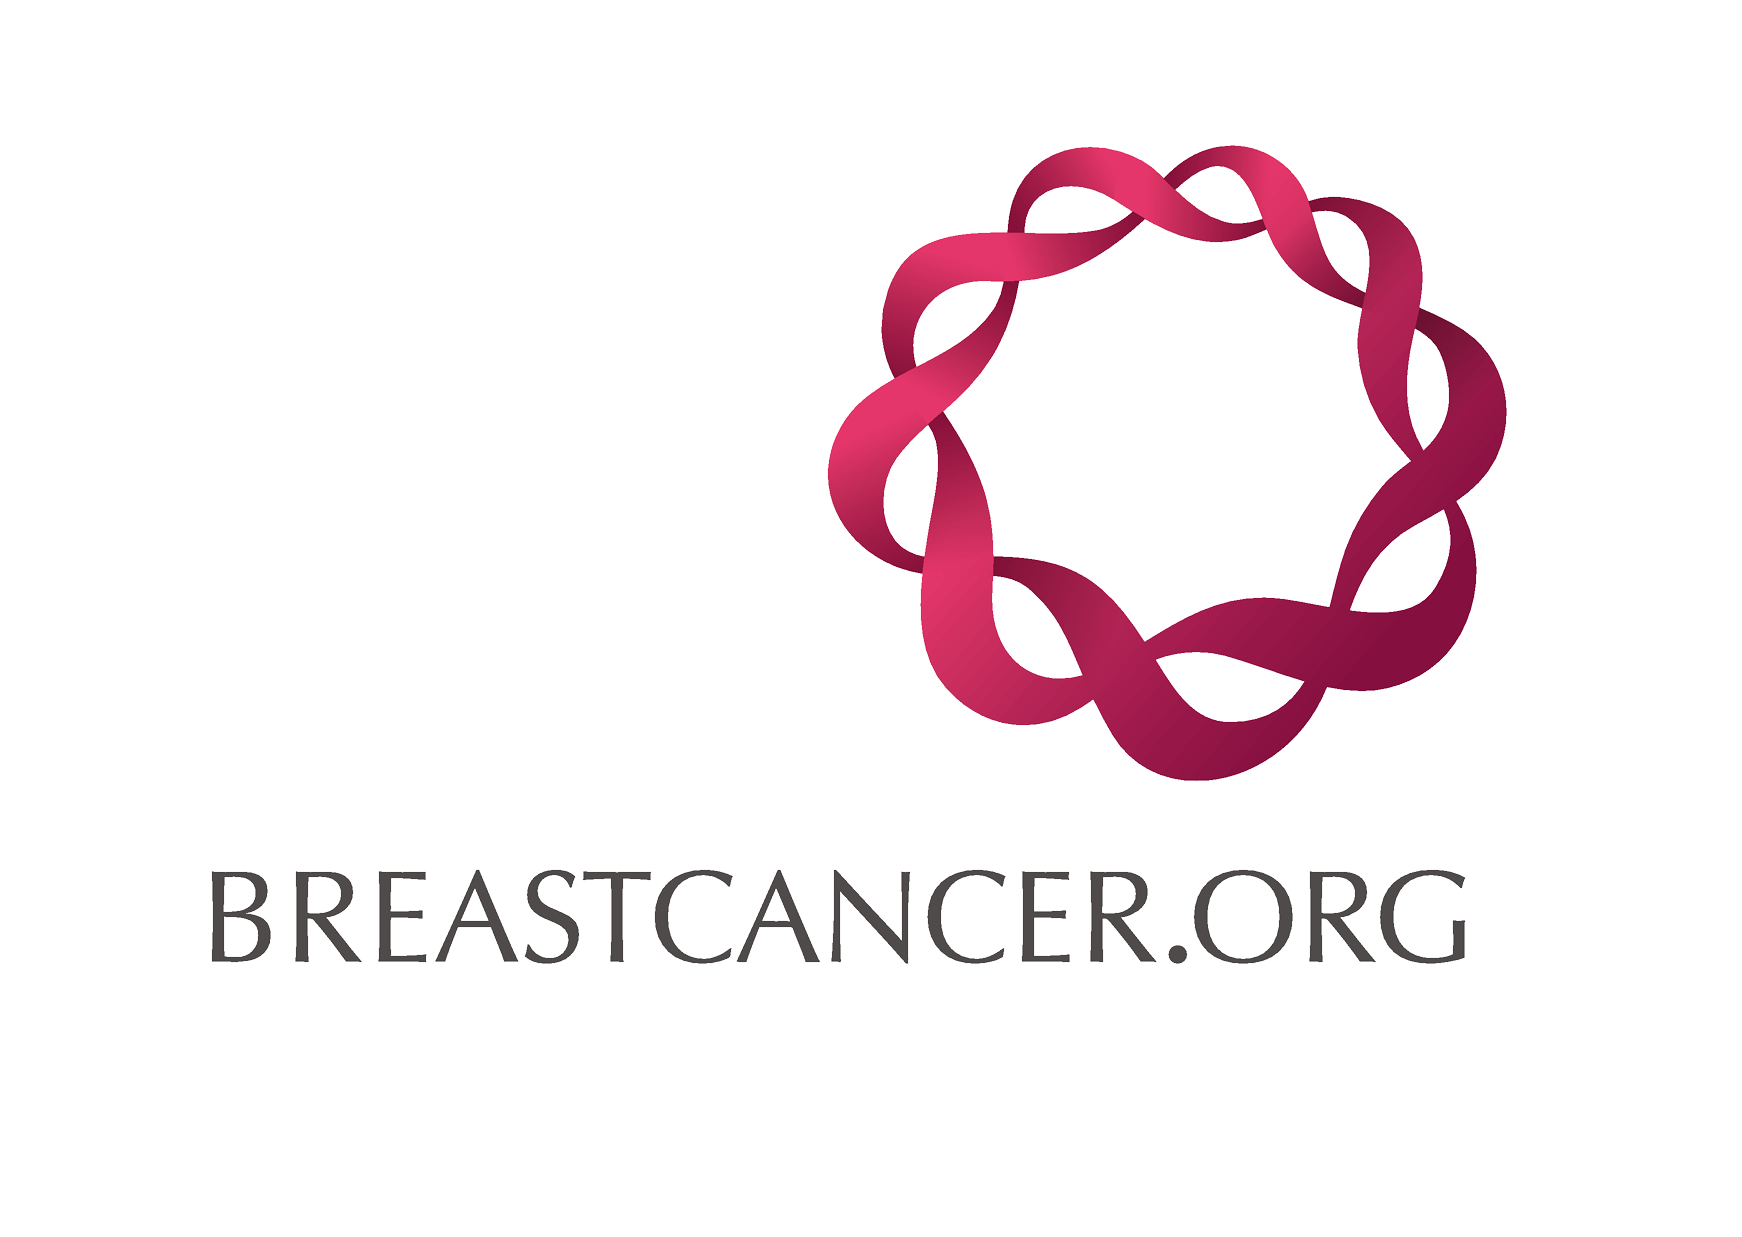 Image of - Breast Cancer Org